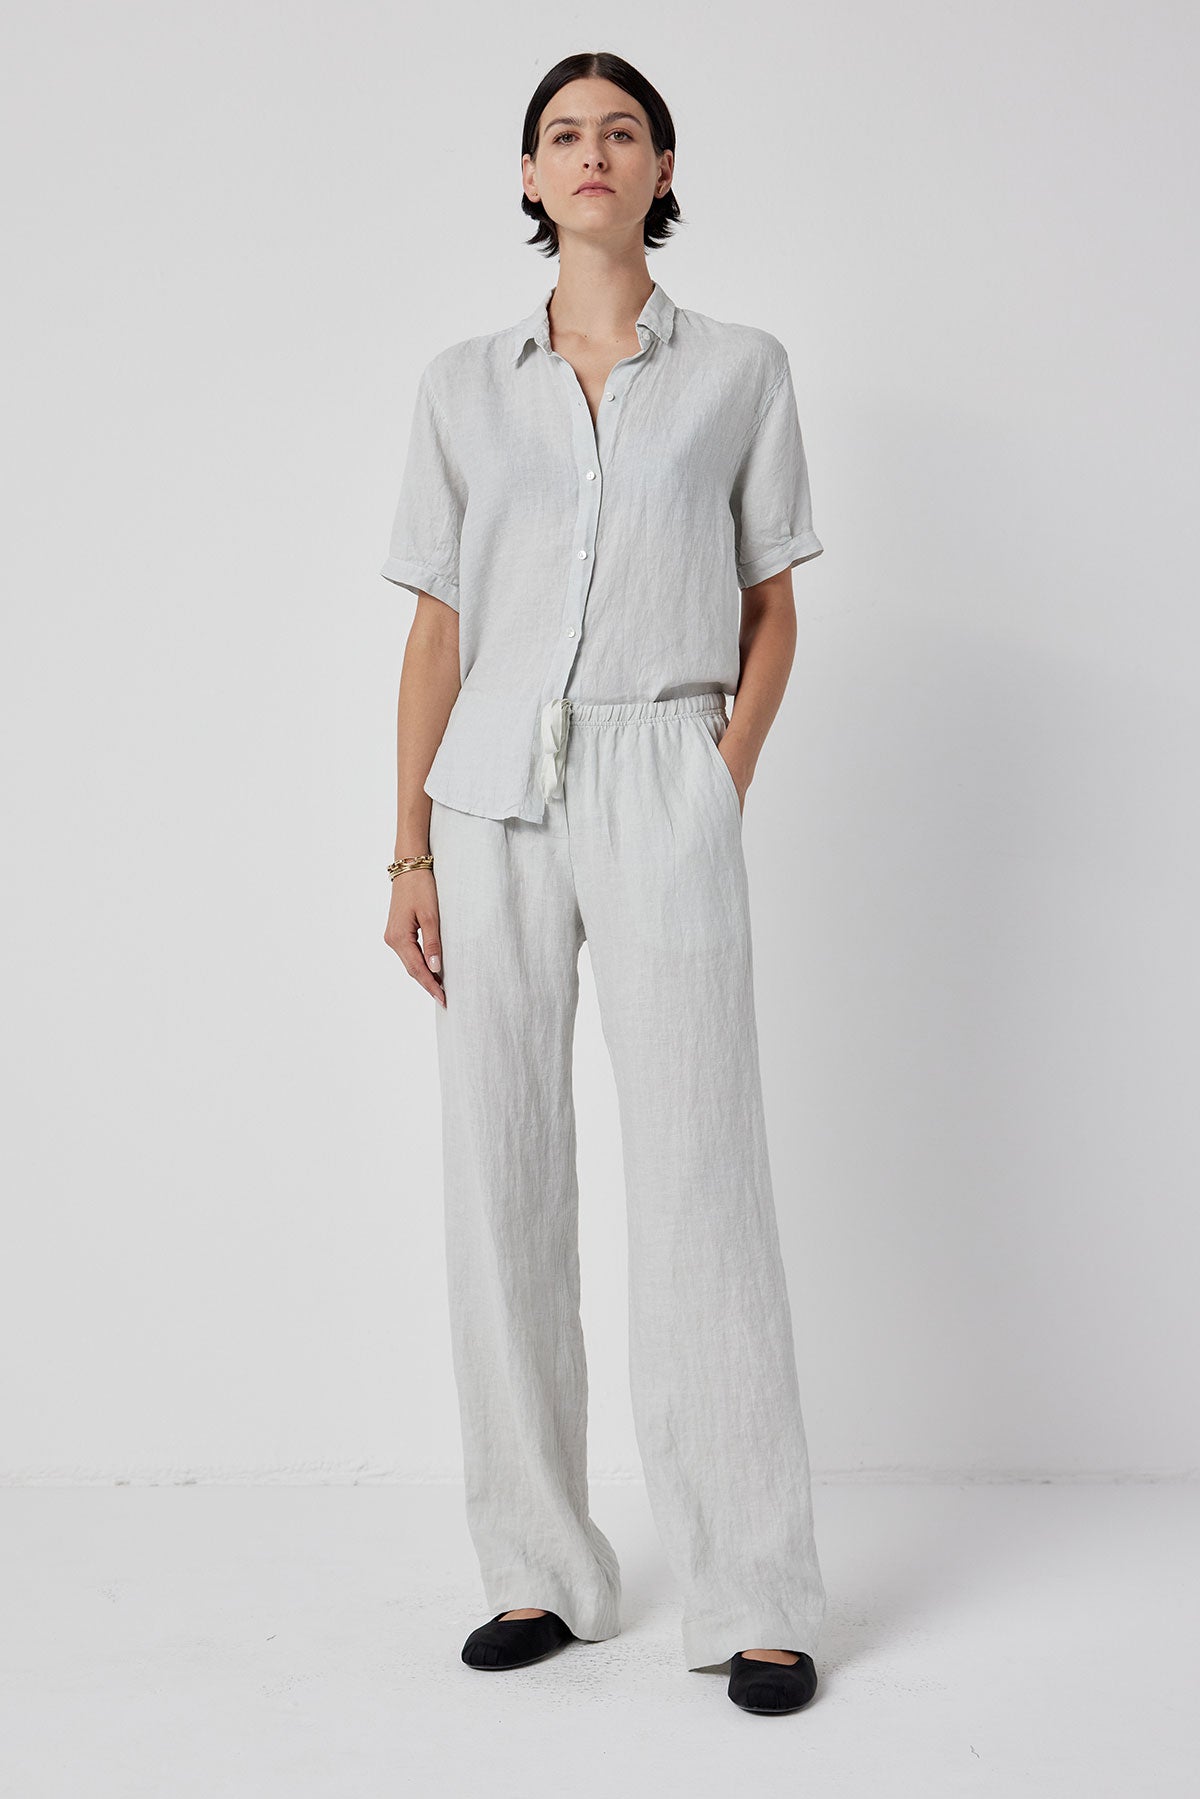 The model is wearing a white linen pant and a MULHOLLAND SHIRT by Velvet by Jenny Graham.-36212581040321